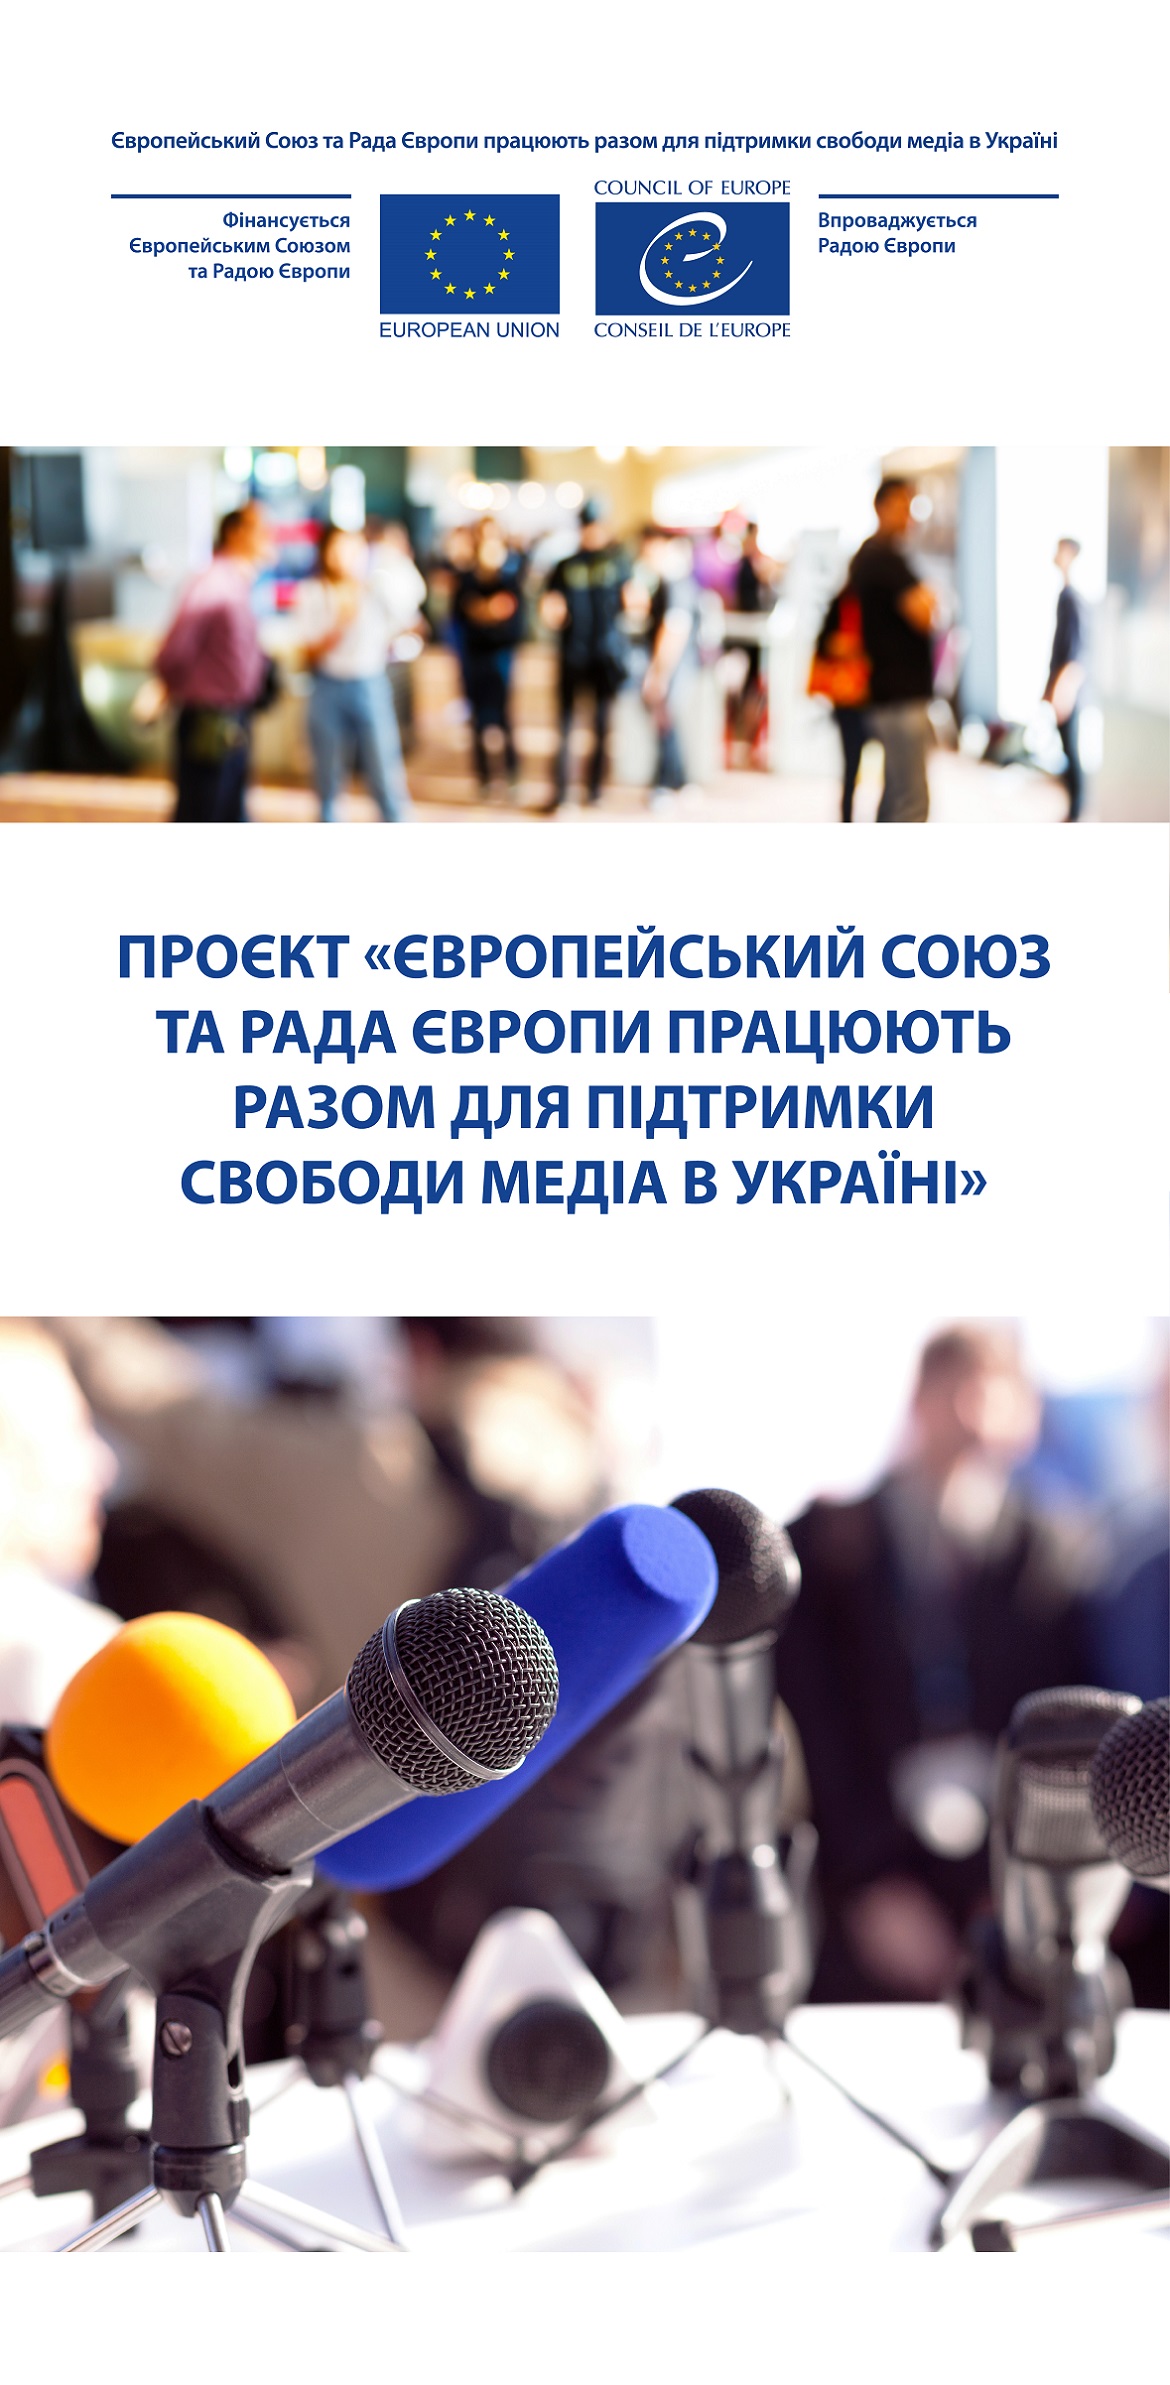 EU and Council of Europe working together to support freedom of media in Ukraine